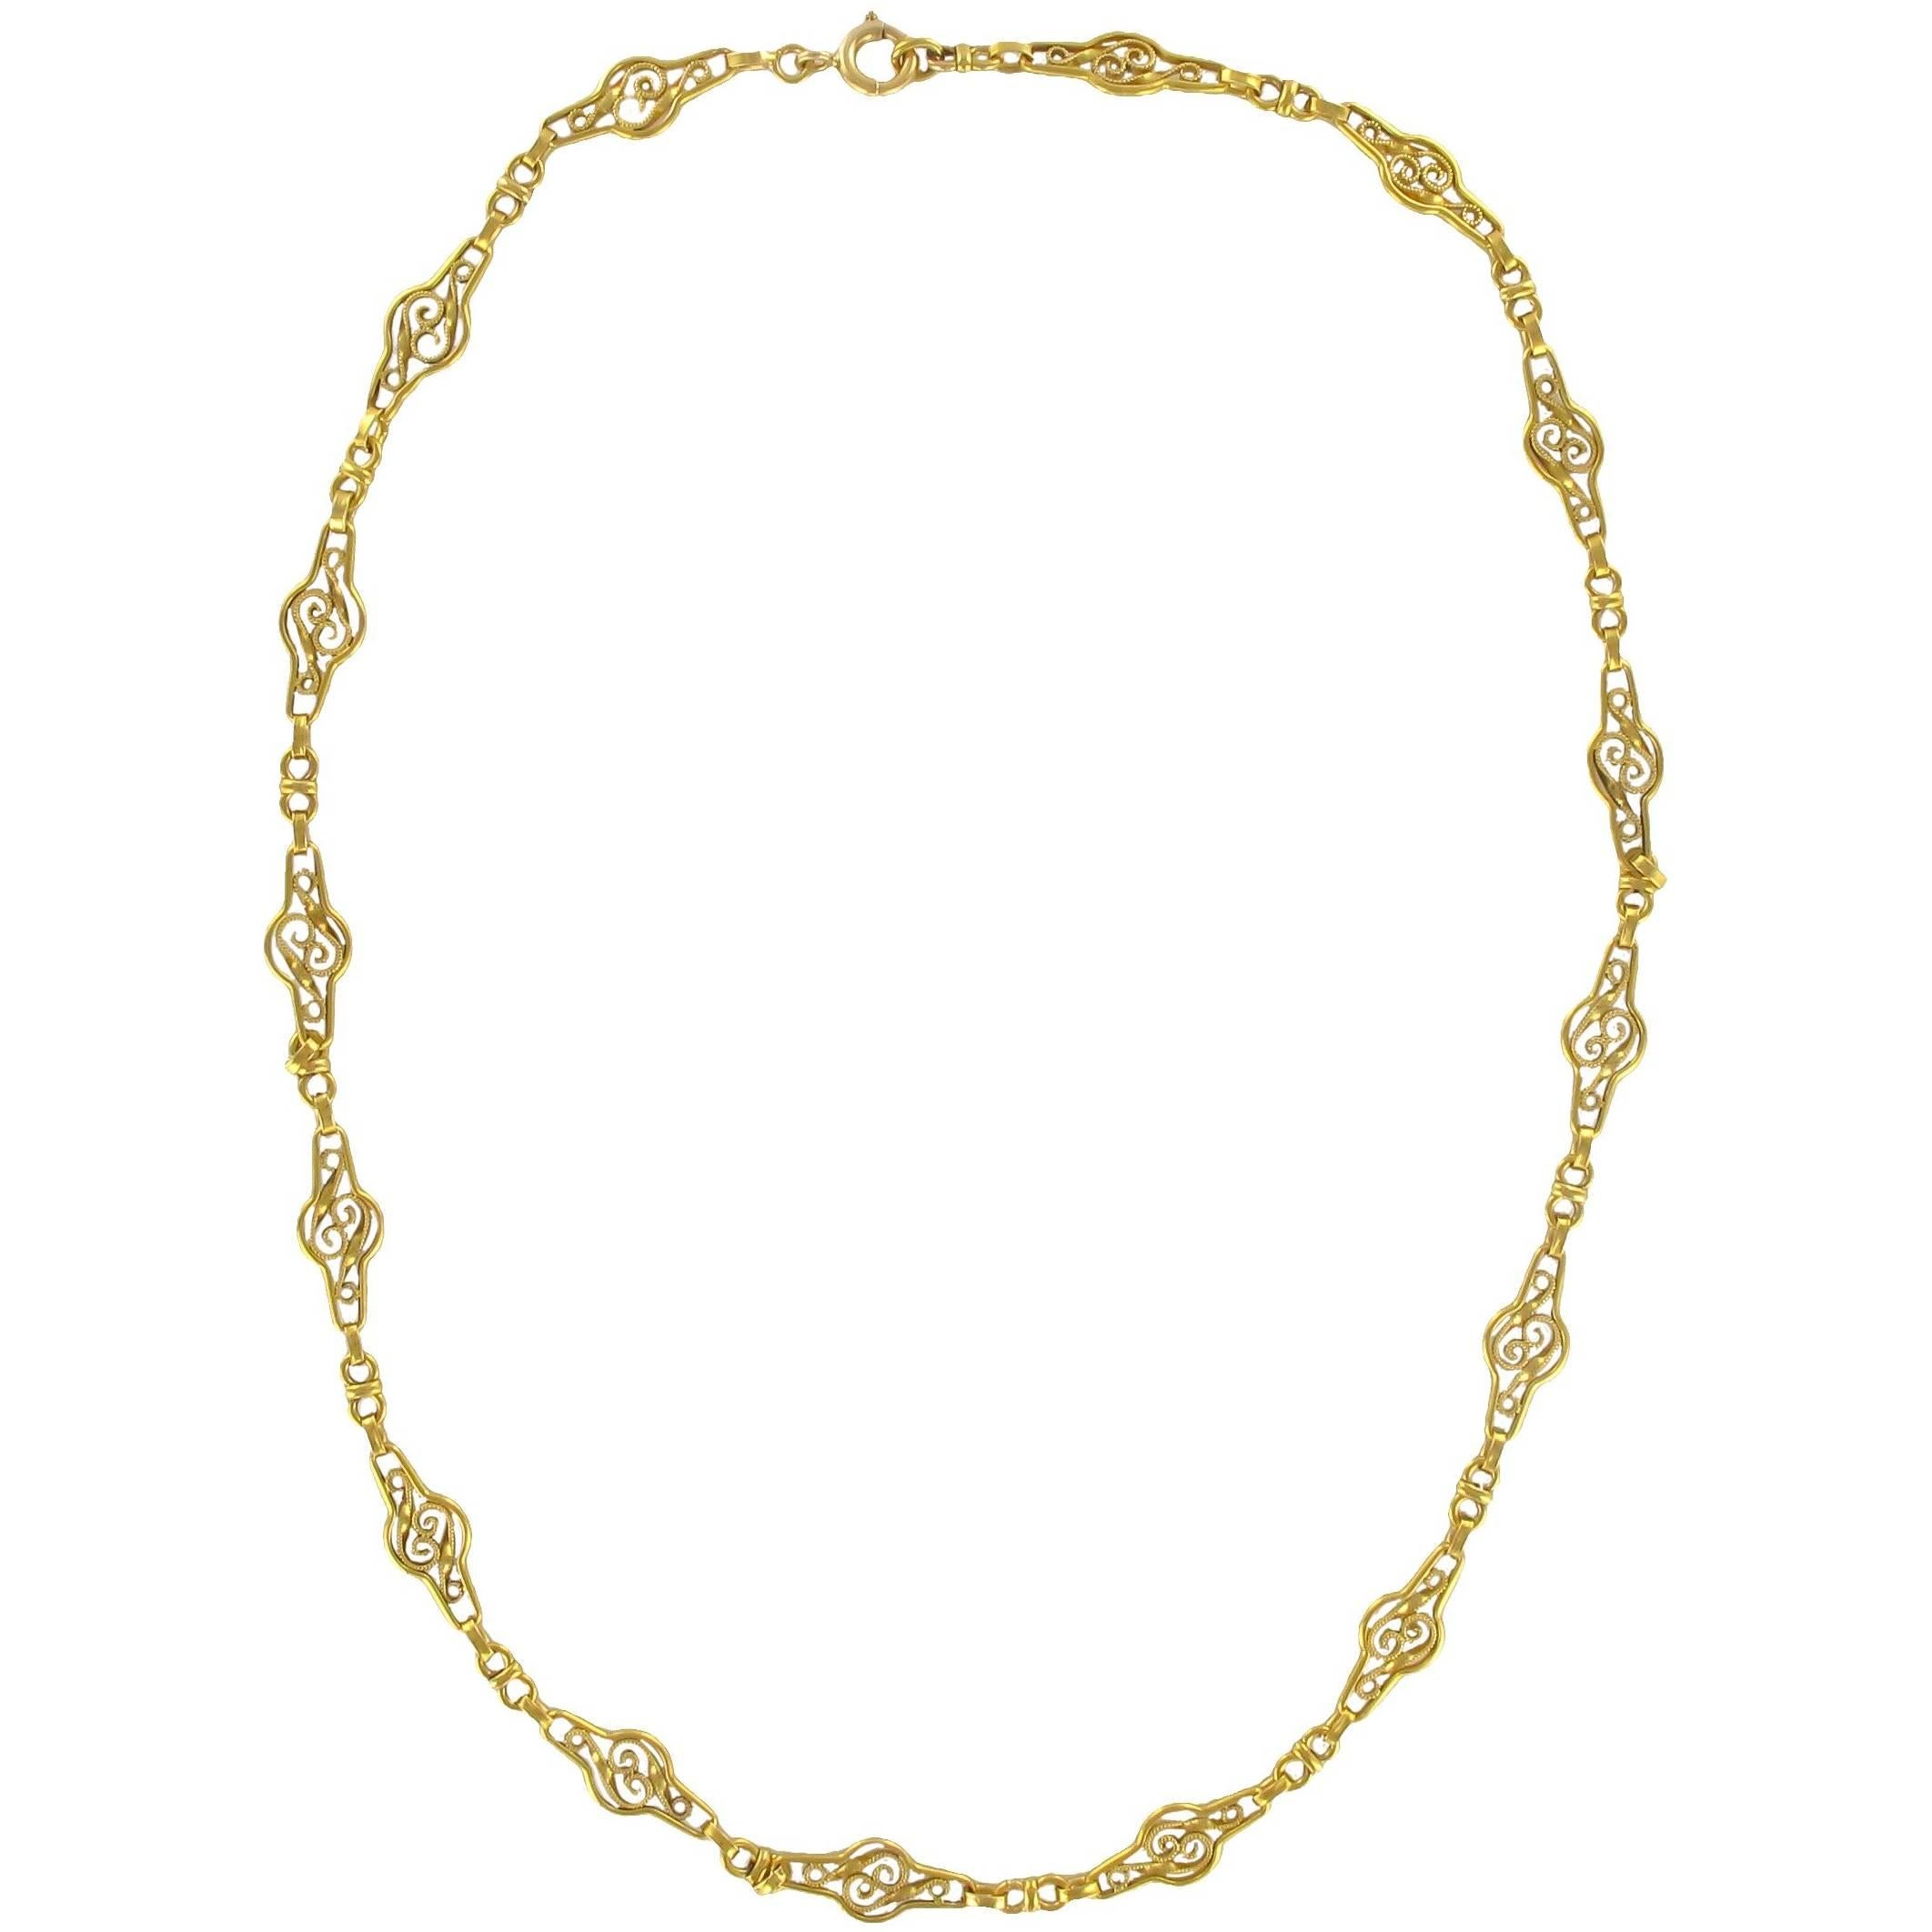 1900s Gold Necklace with Filigree Motifs